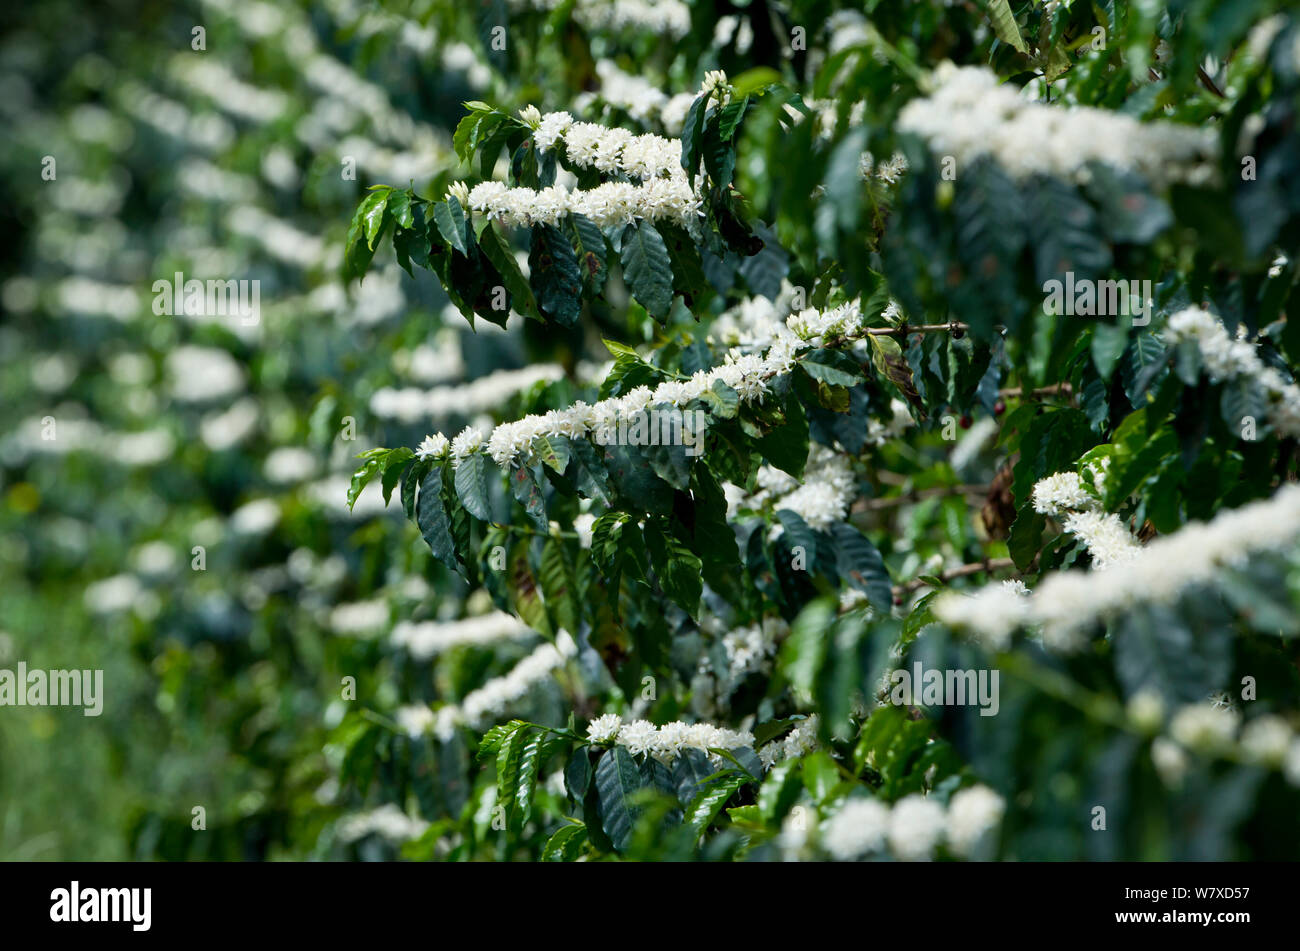 Coffee (Coffea arabica) shrubs in bud and flower. Commercial coffee farm, Tanzania, East Africa. Stock Photo